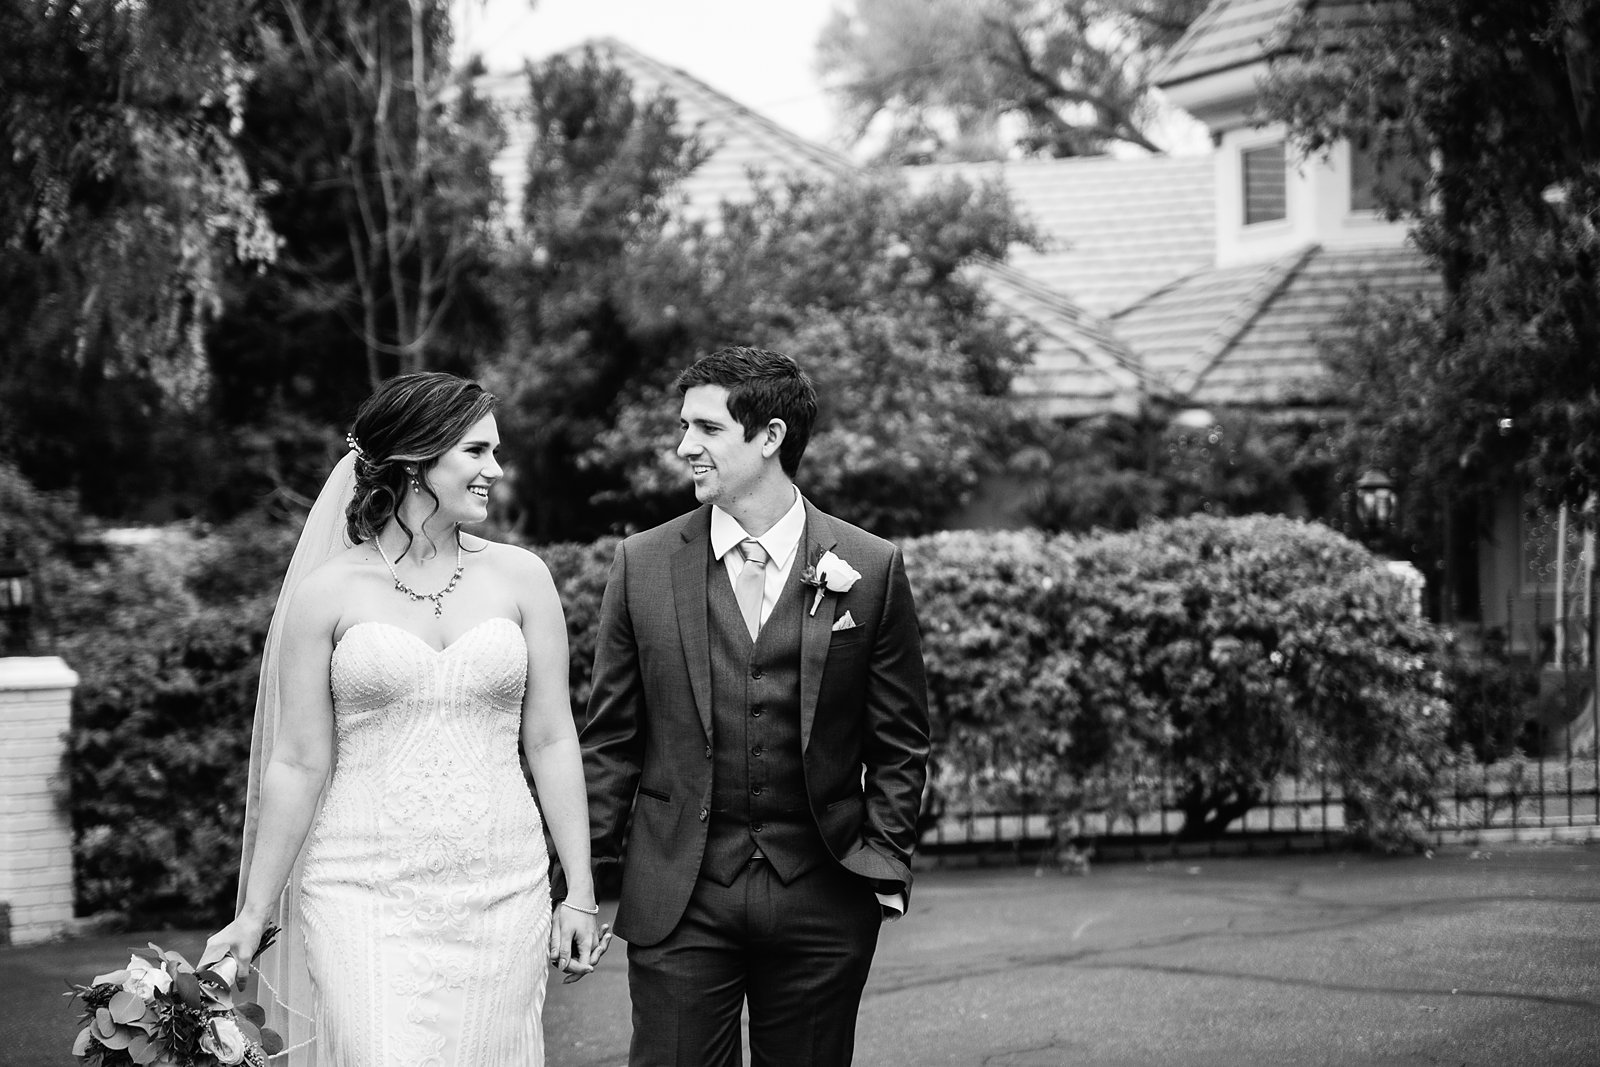 Bride and Groom walking together during their The Wright House wedding by Arizona wedding photographer PMA Photography.